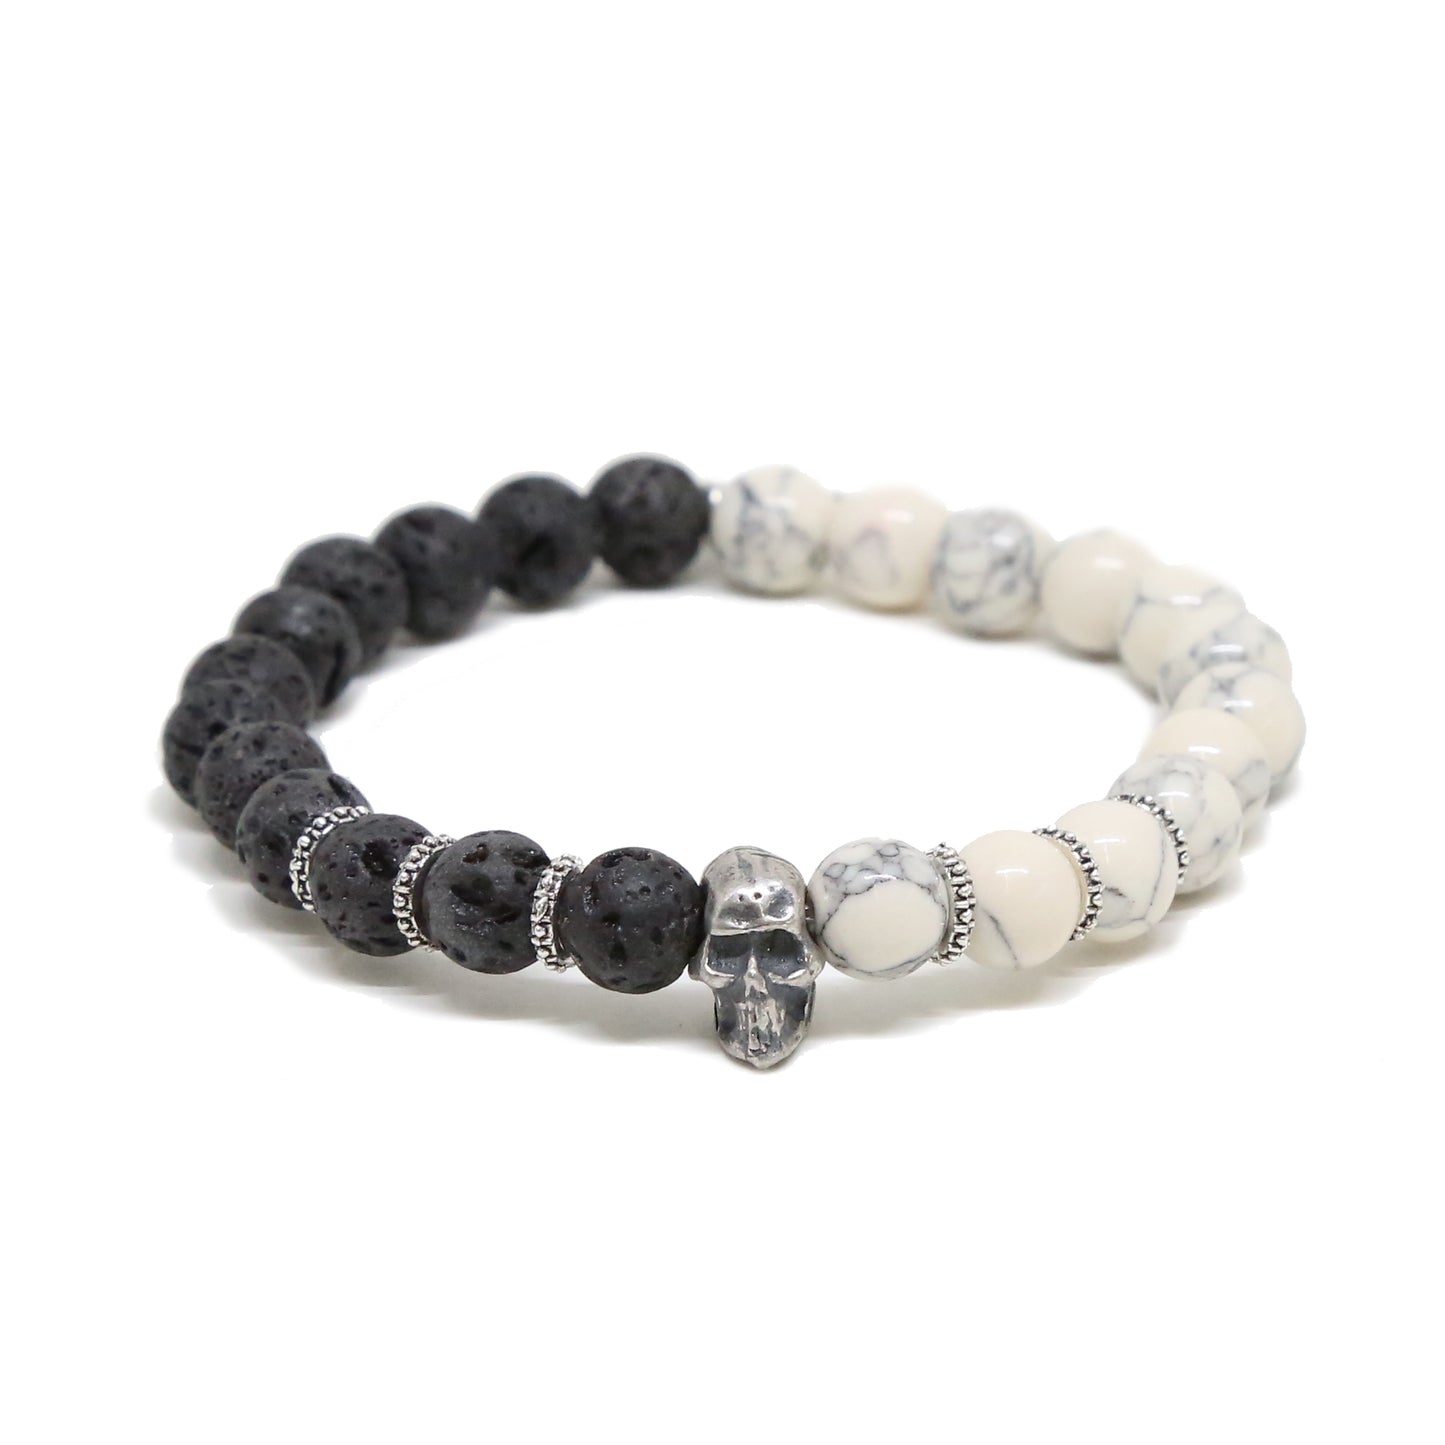 Stuck In Limbo Bracelet in Lava Bead, White, and Silver Ox